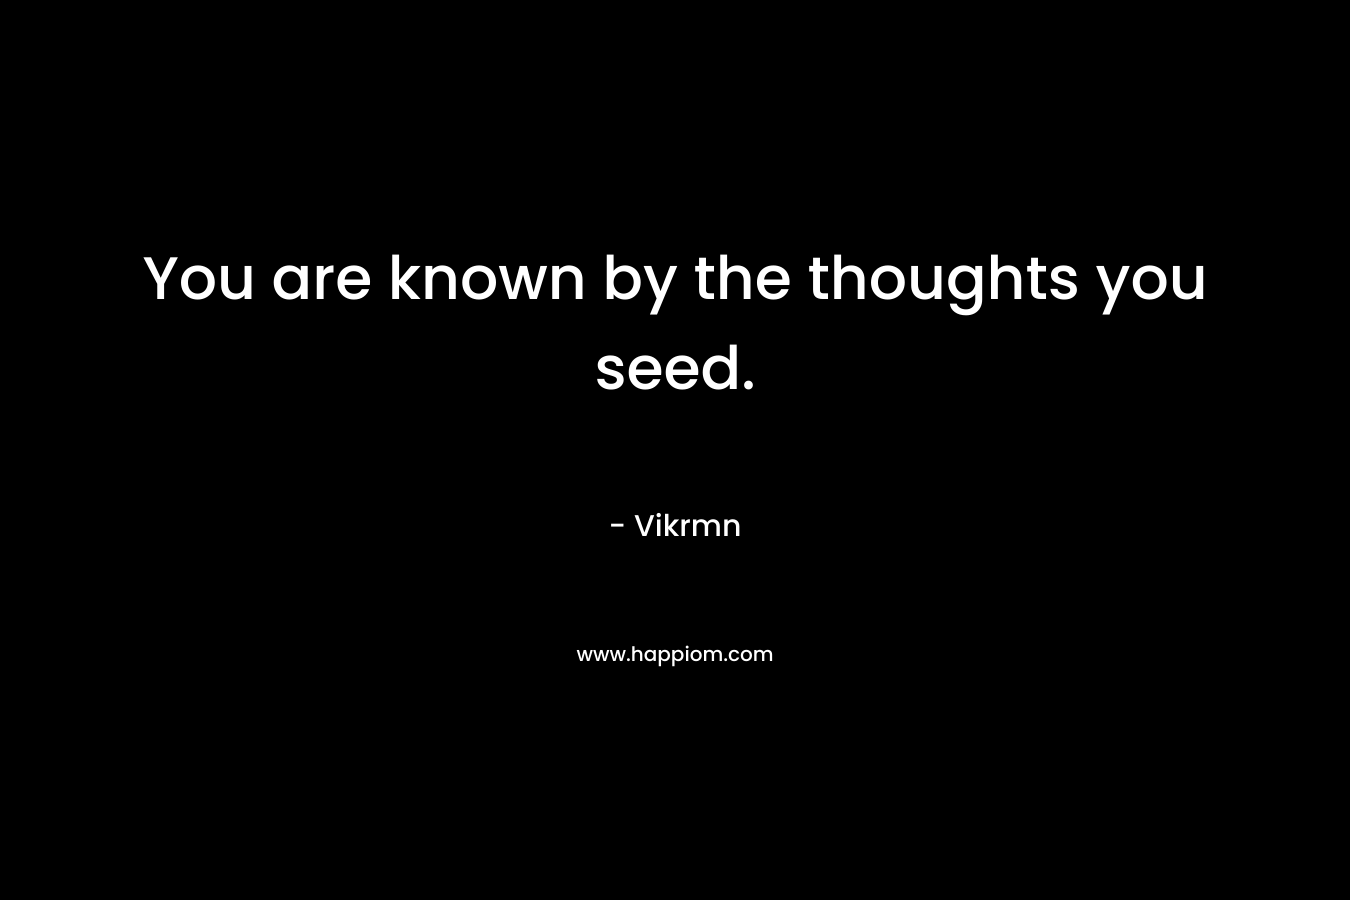 You are known by the thoughts you seed.